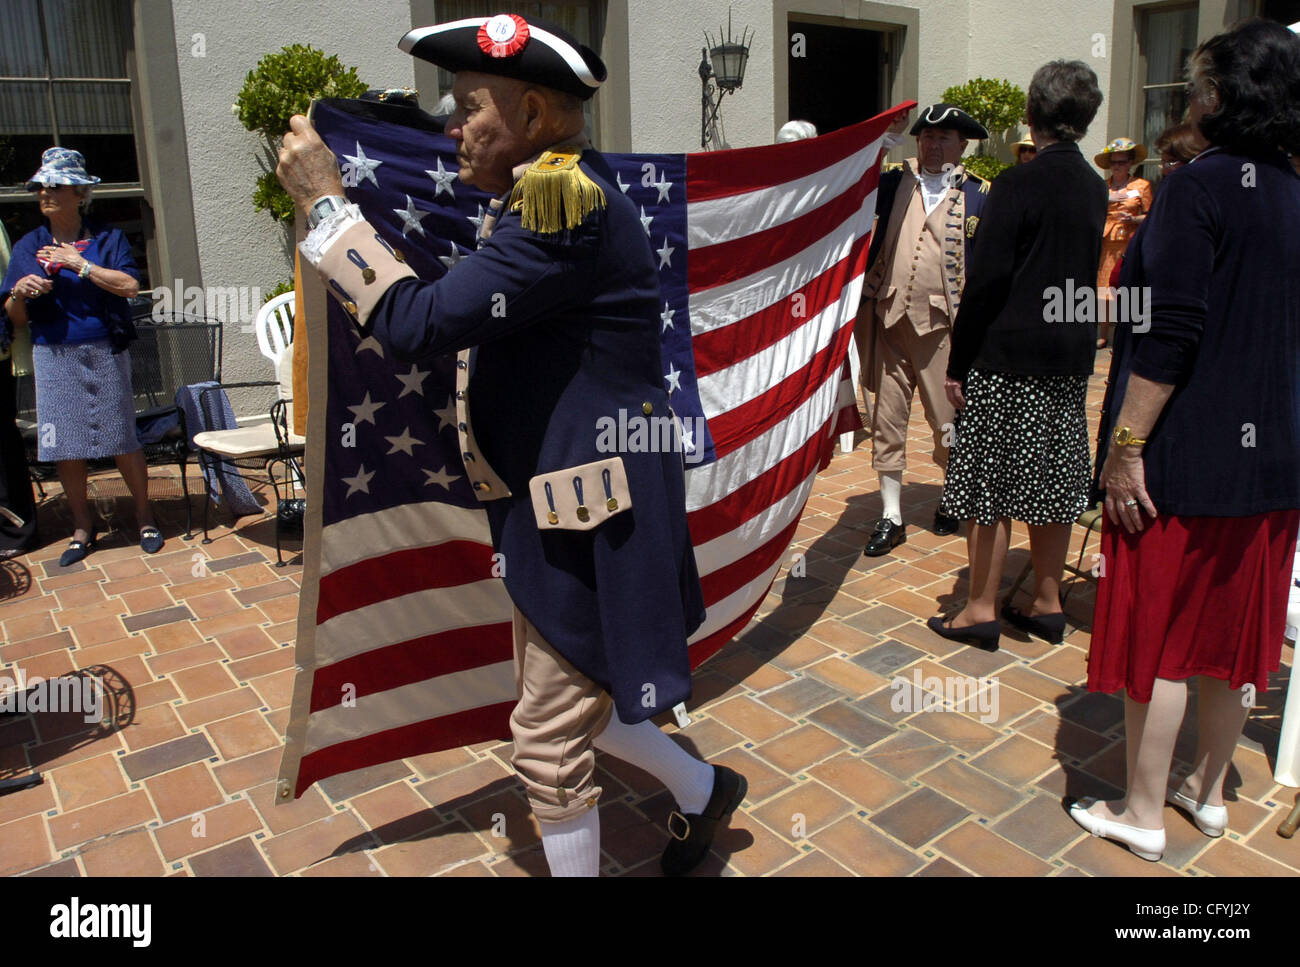 Alvie Hartsog, near, and Bill Gledhill, both of the Santa Clara chapter of the National Sojourners, carry in the flag for a presentation to the Piedmont Area Republican Women in Piedmont, Calif. on Saturday, May 19, 2007.  (Kristopher Skinner/ Contra Costa Times) Stock Photo